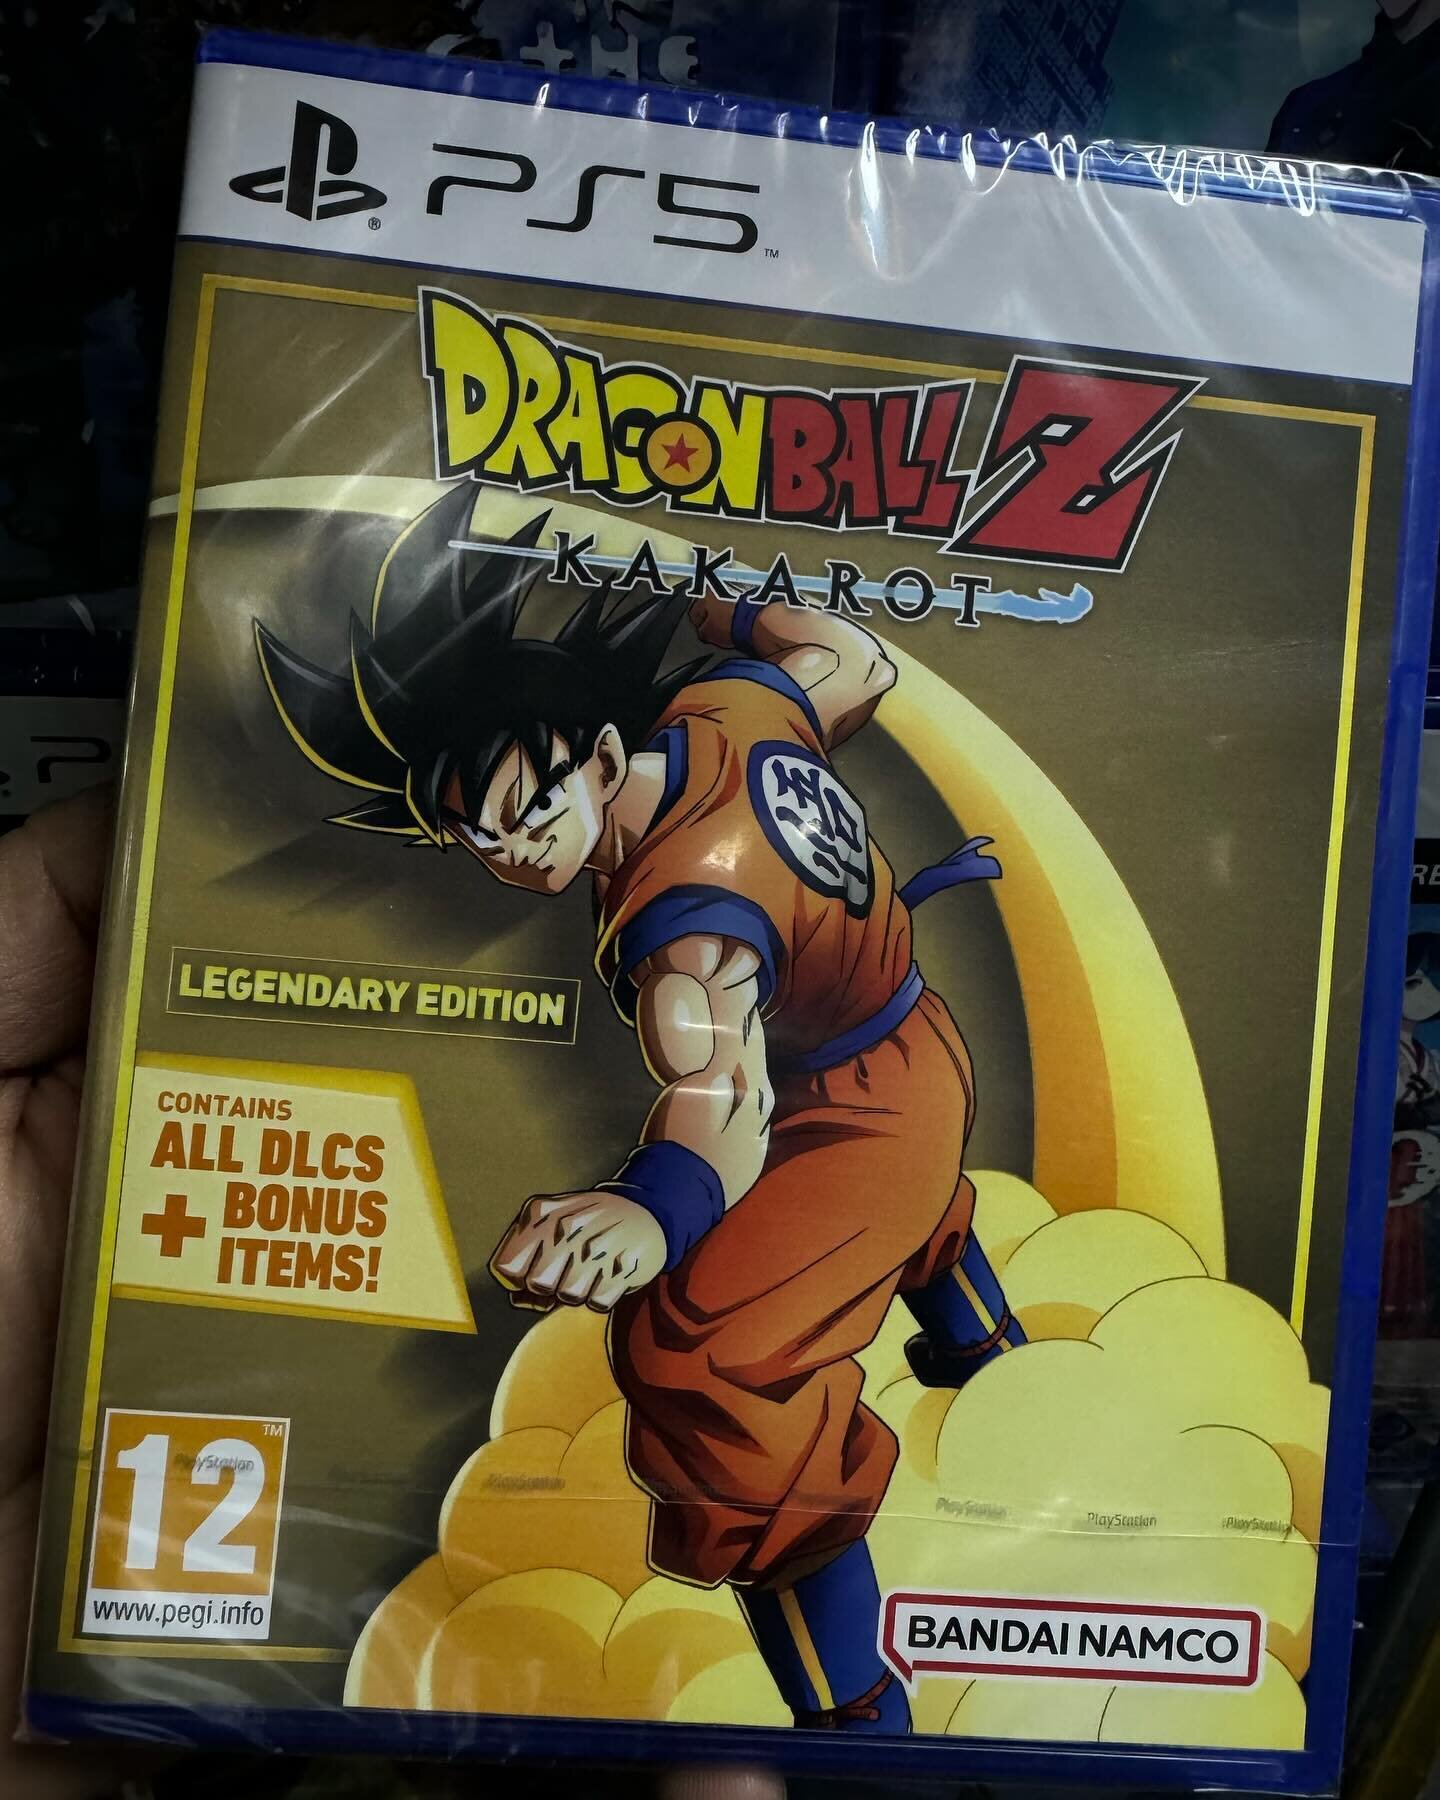 Dragonball Z Kakarot Legendary Edition out now on PS5